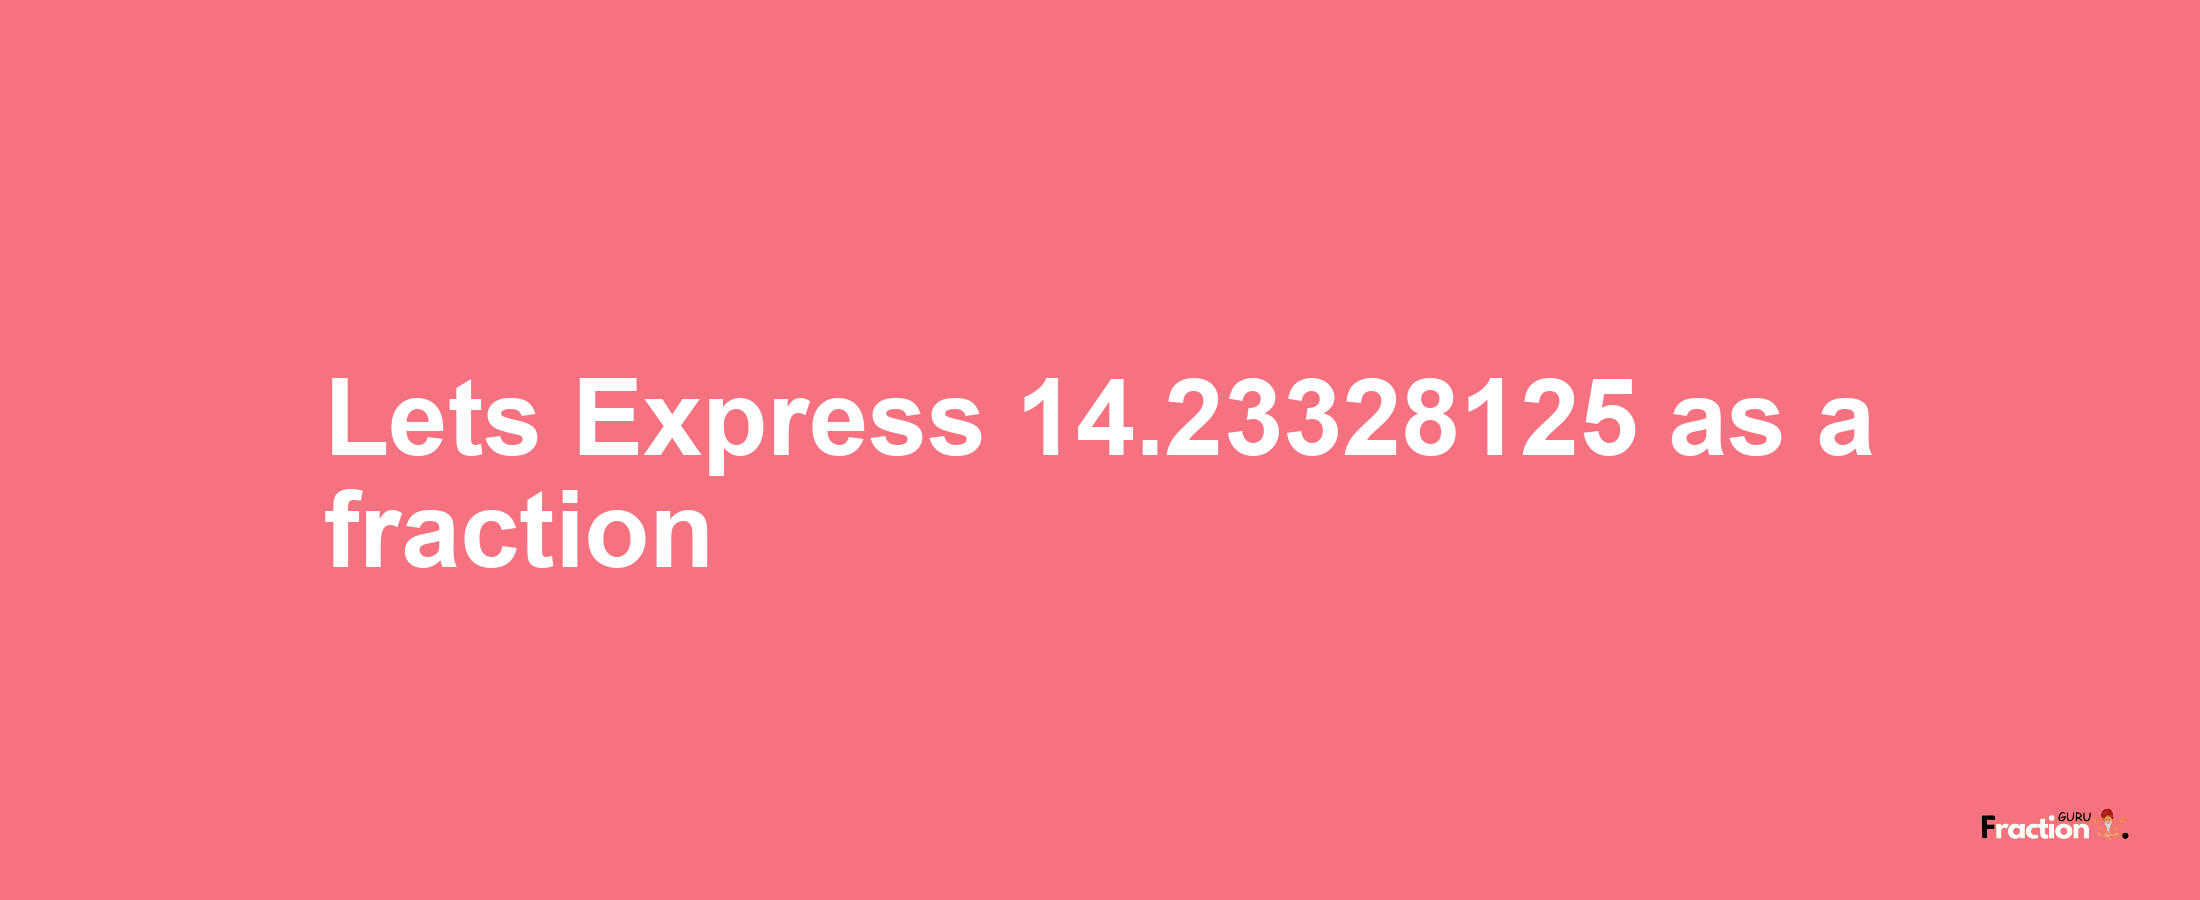 Lets Express 14.23328125 as afraction